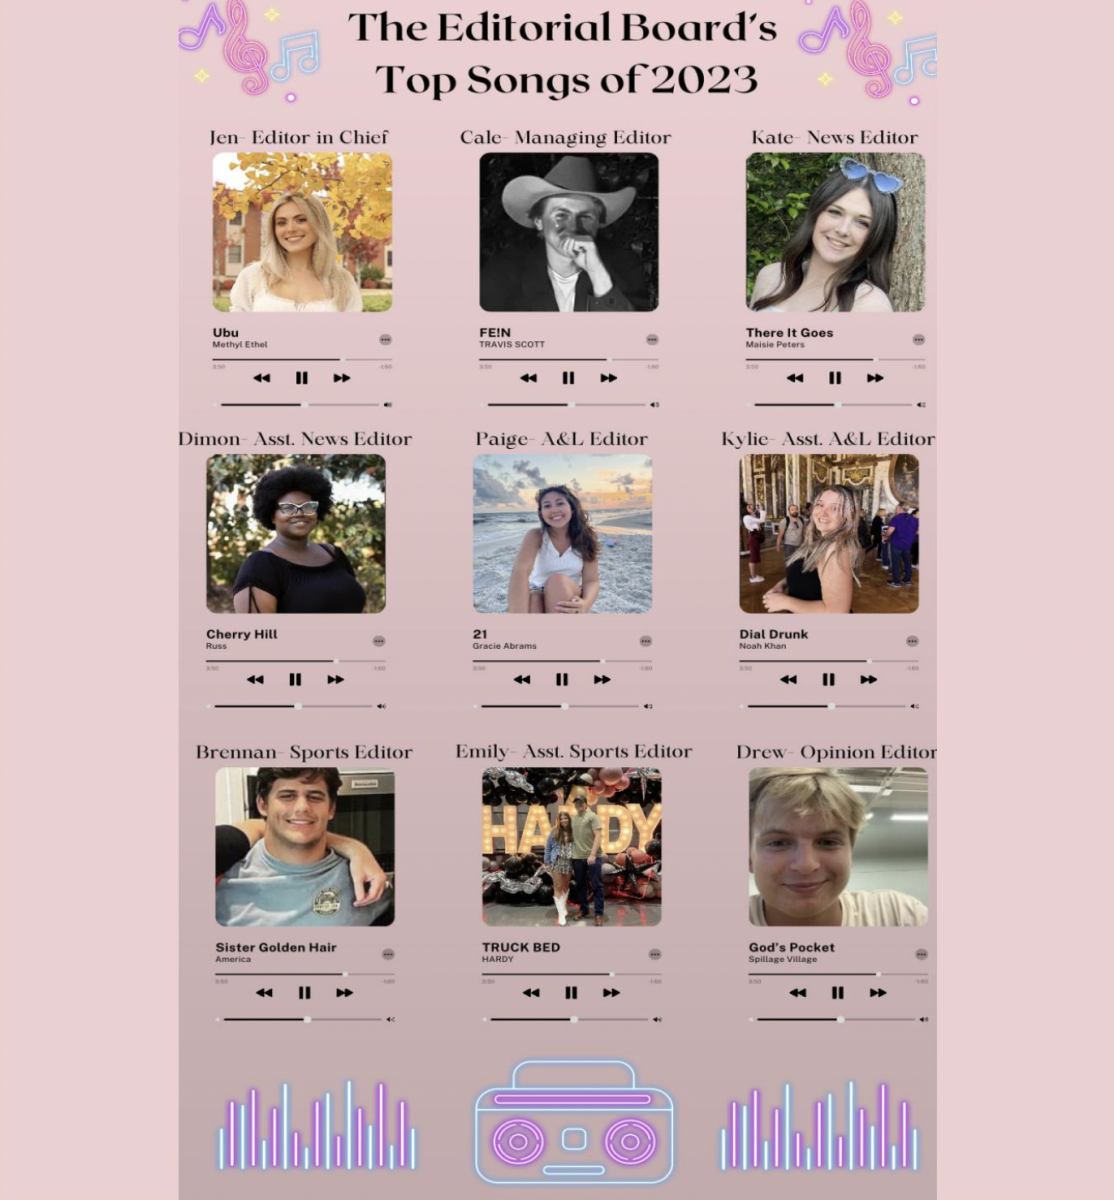 The editorial boards top songs of 2023